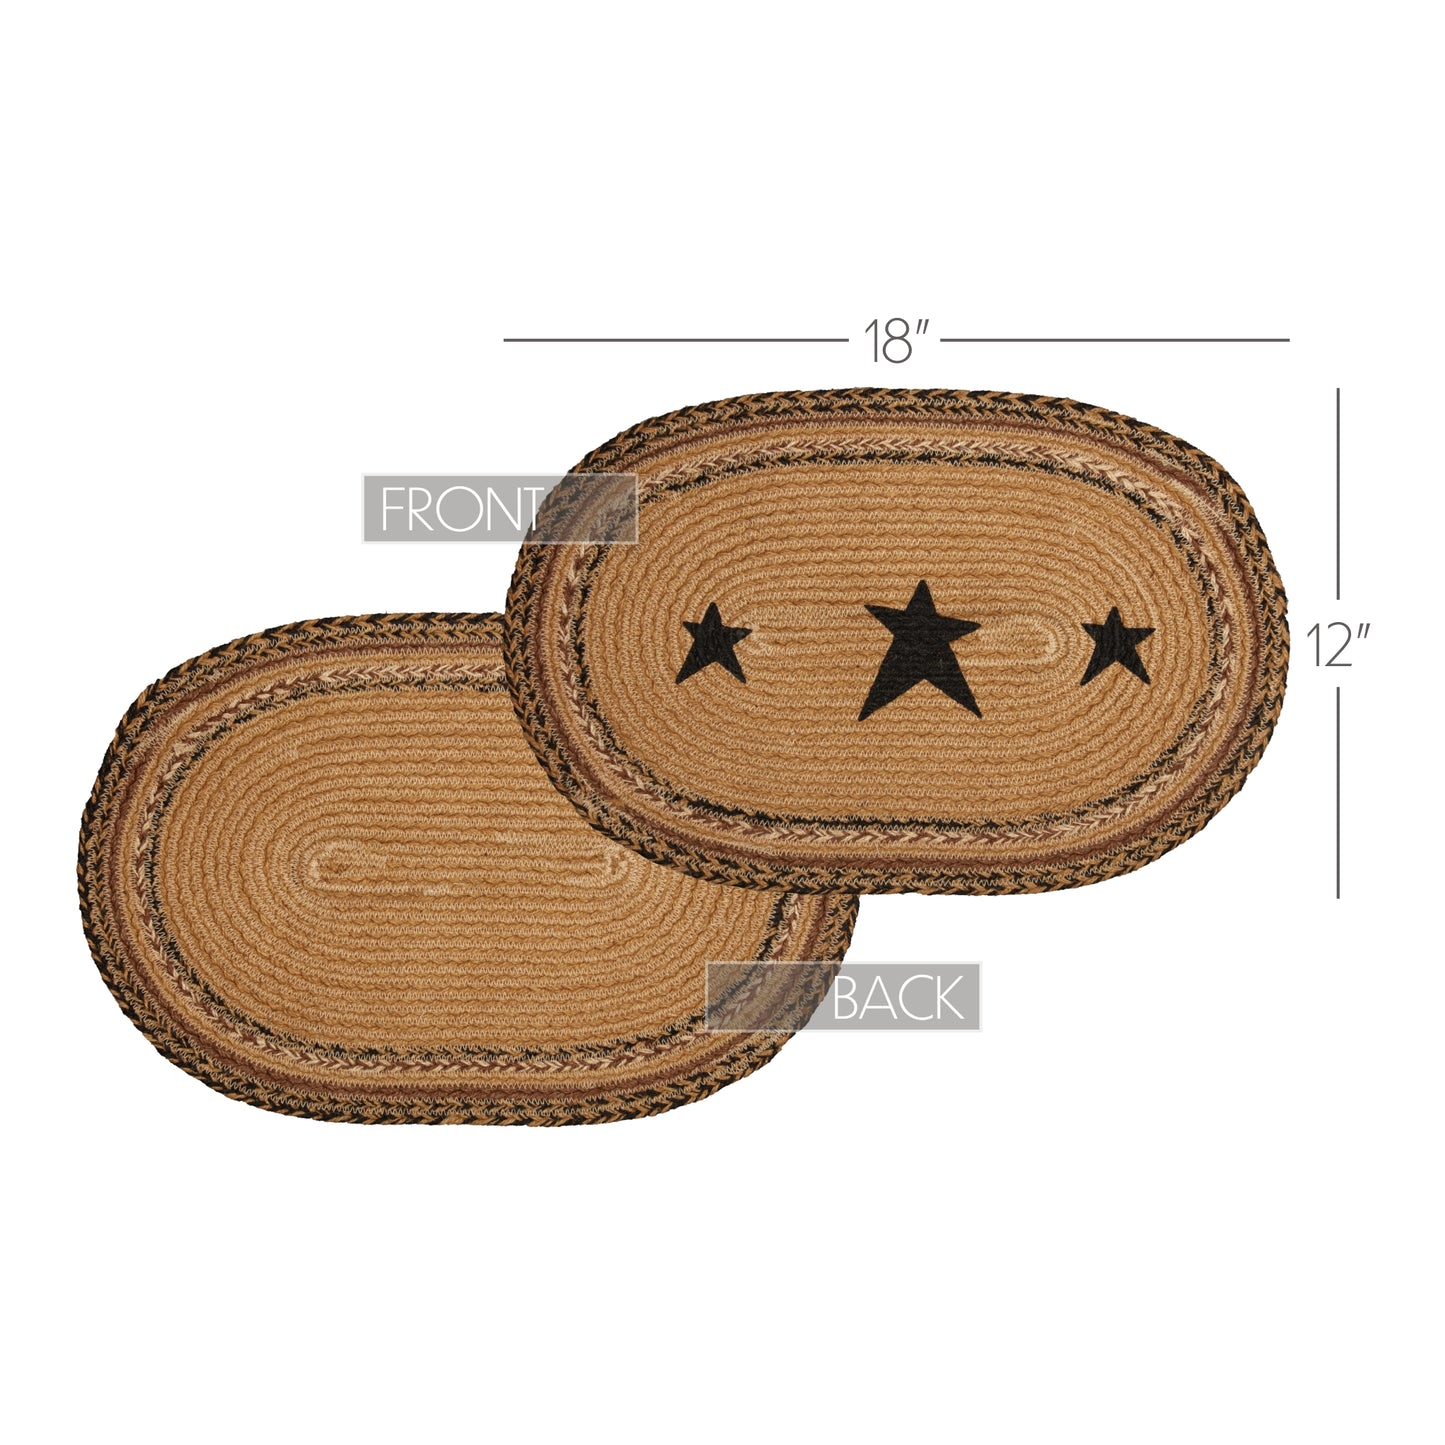 30603-Kettle-Grove-Jute-Placemat-Stencil-Star-Set-of-6-12x18-image-4